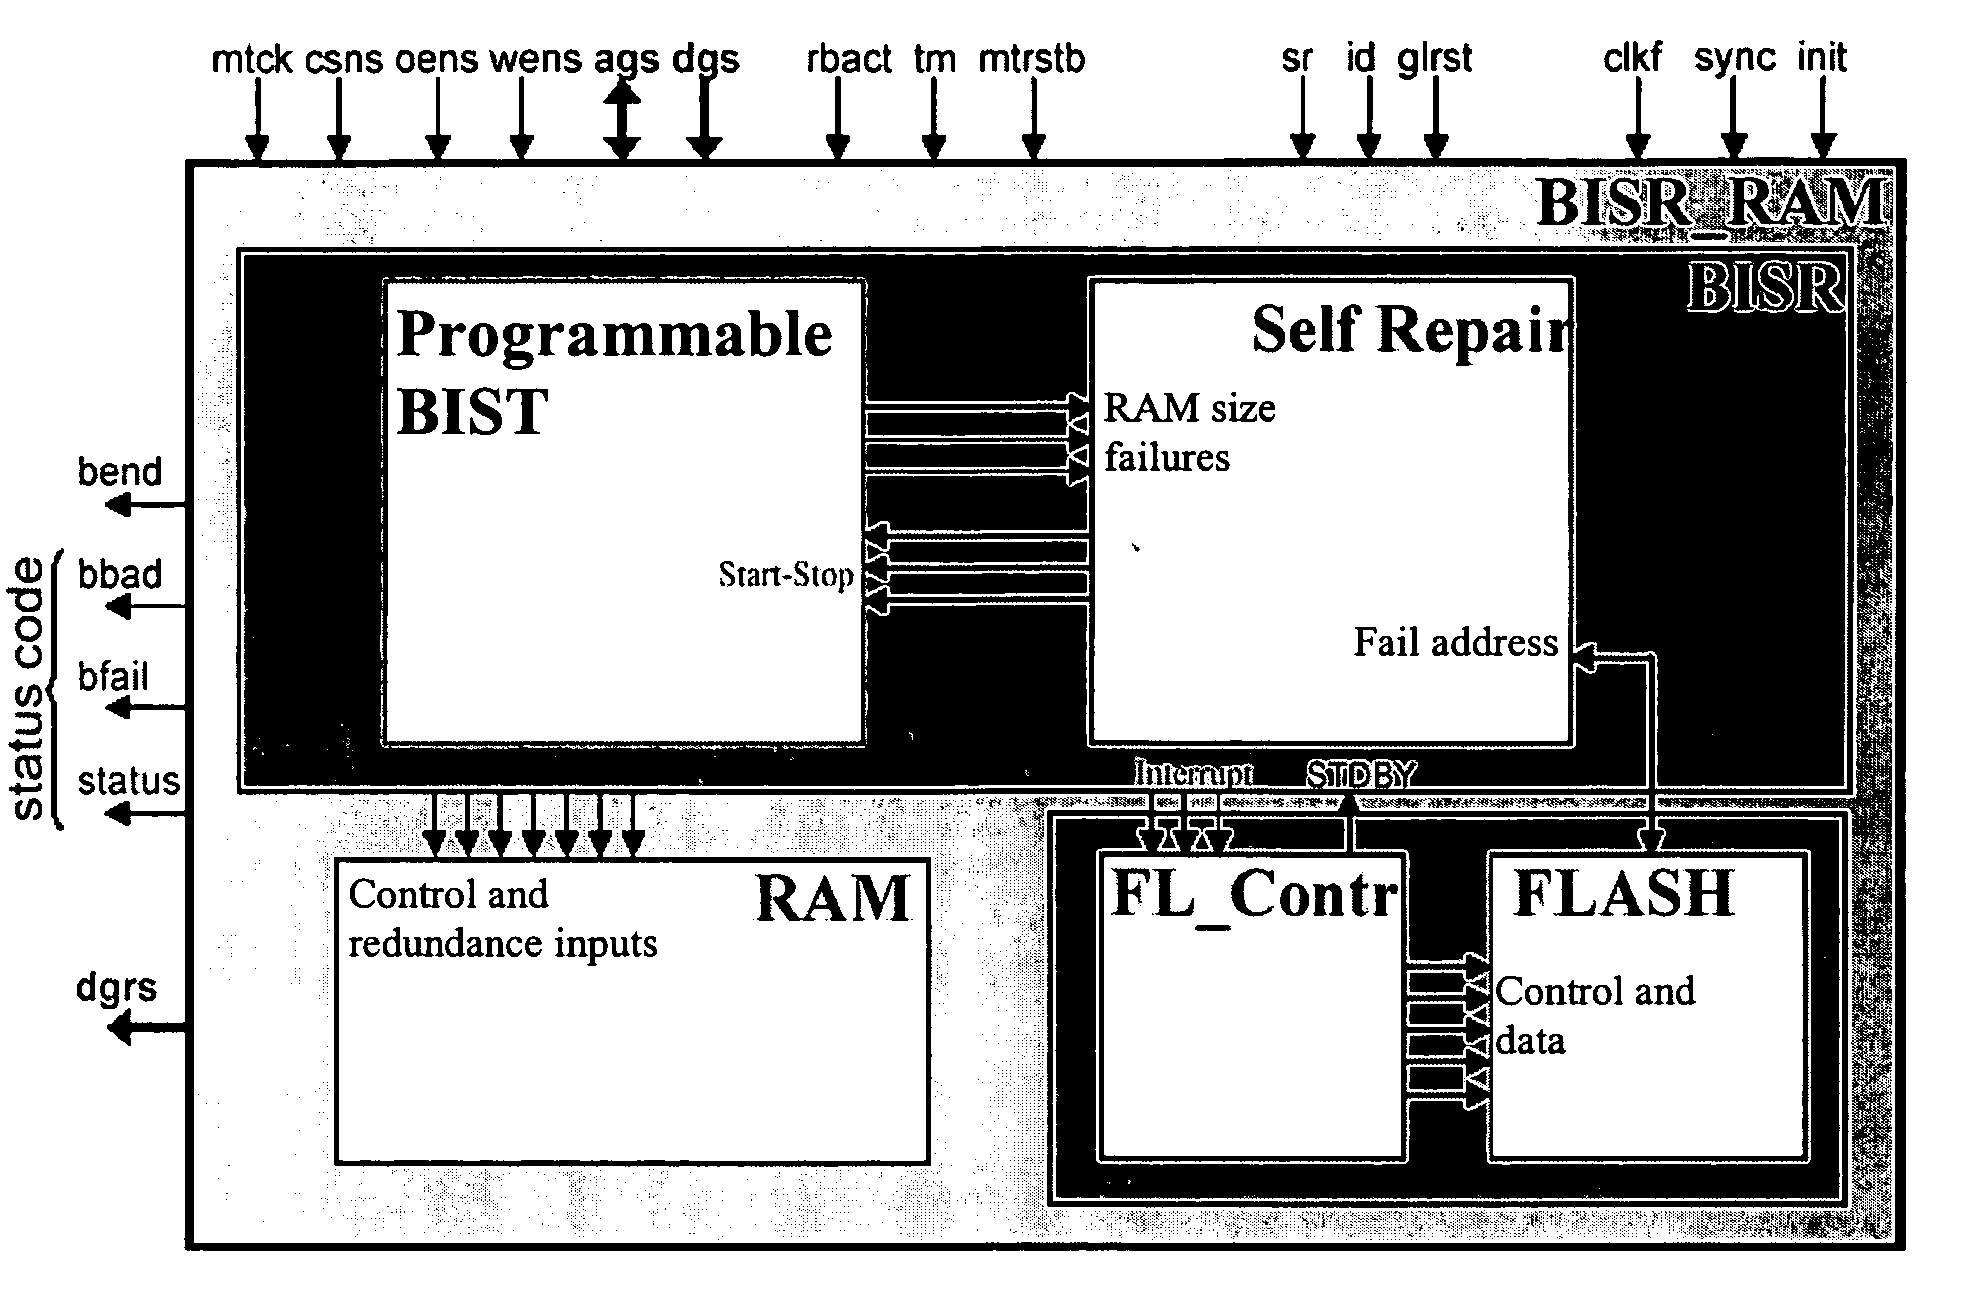 Programmable multi-mode built-in self-test and self-repair structure for embedded memory arrays